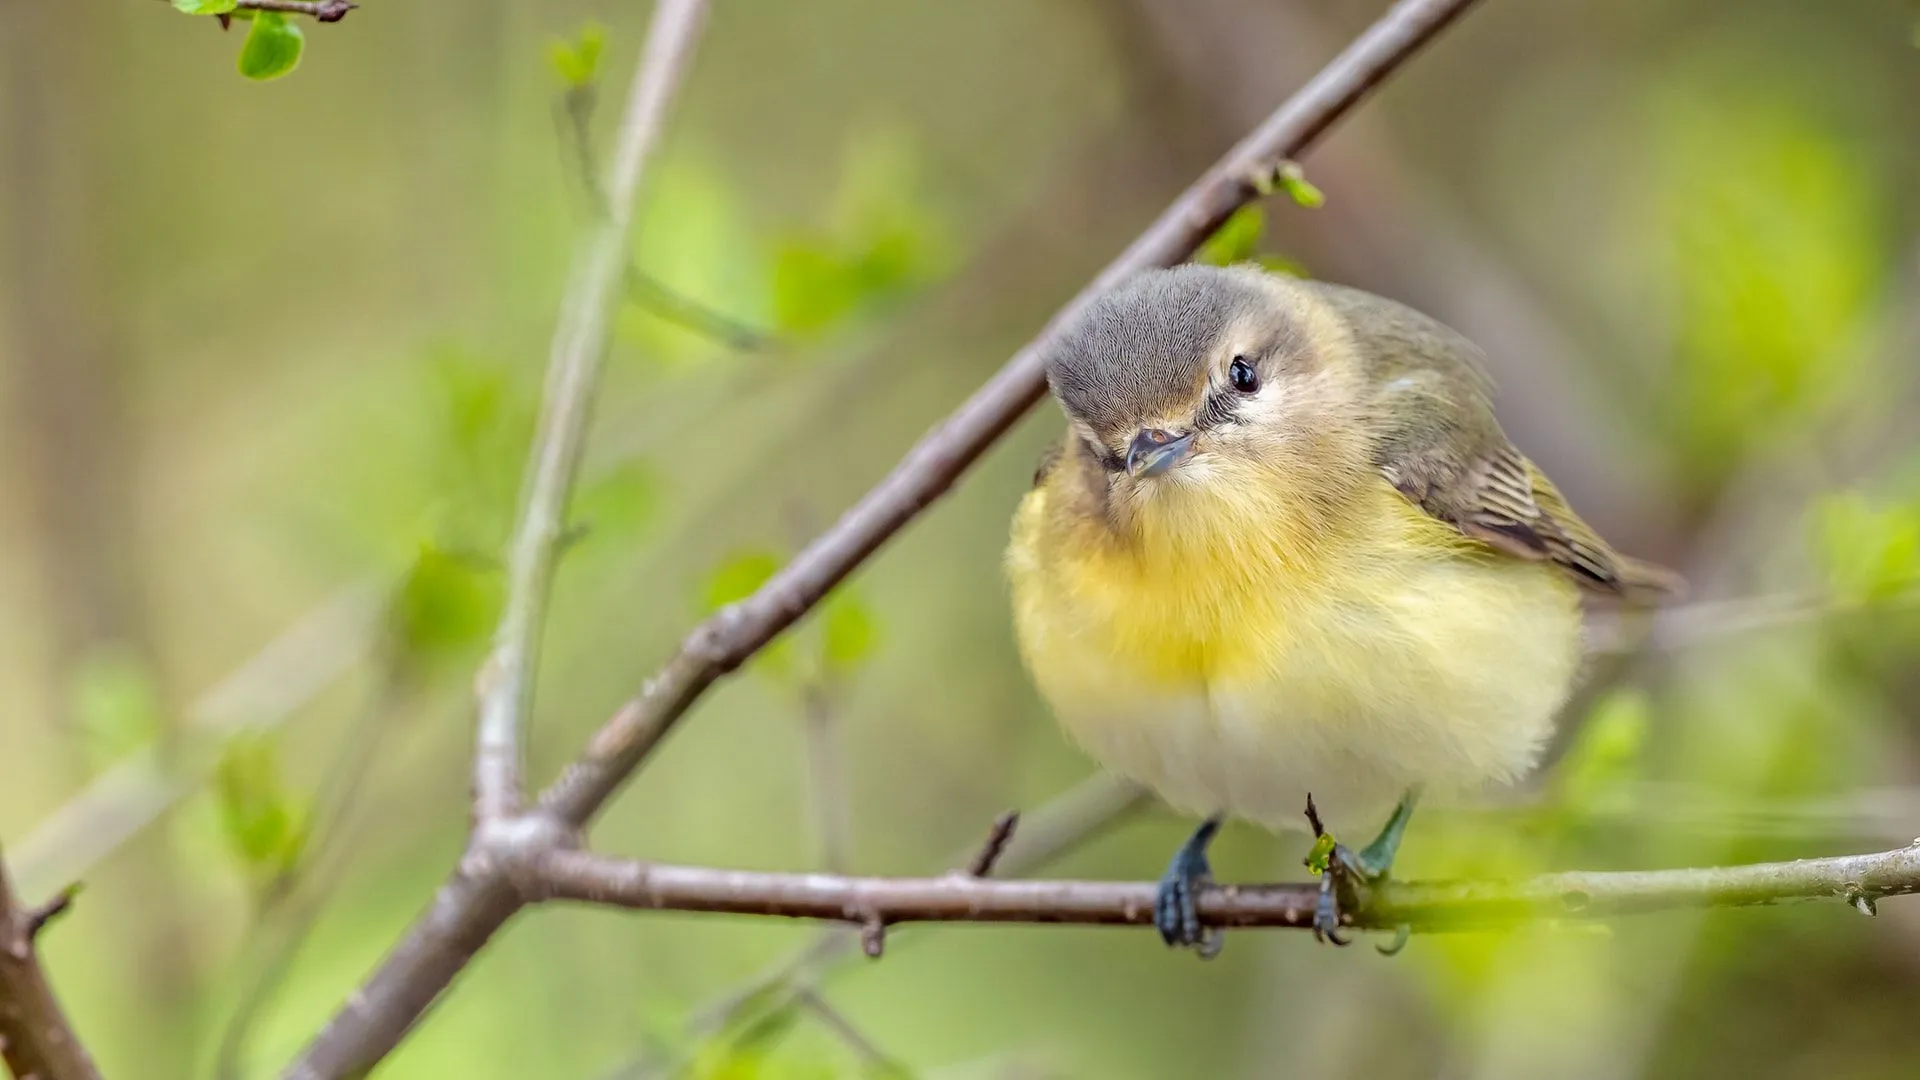 Facts about Vireonidae Vireos and their cup-shaped nest are amusing!